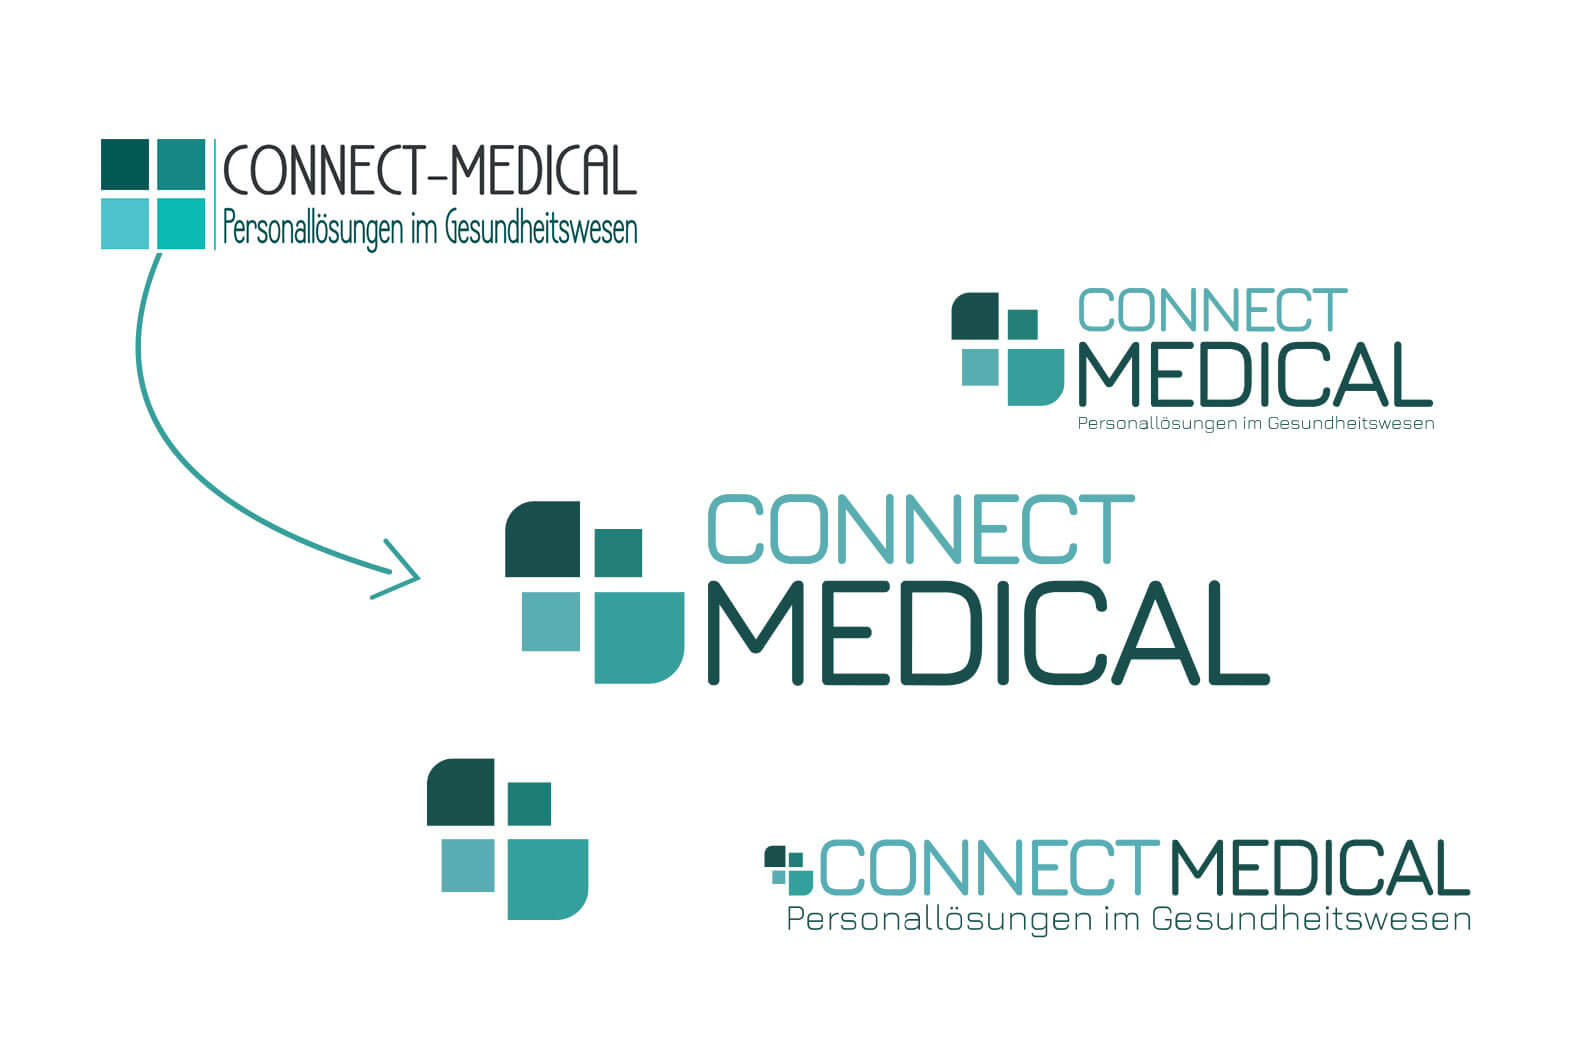 Connect-Medical